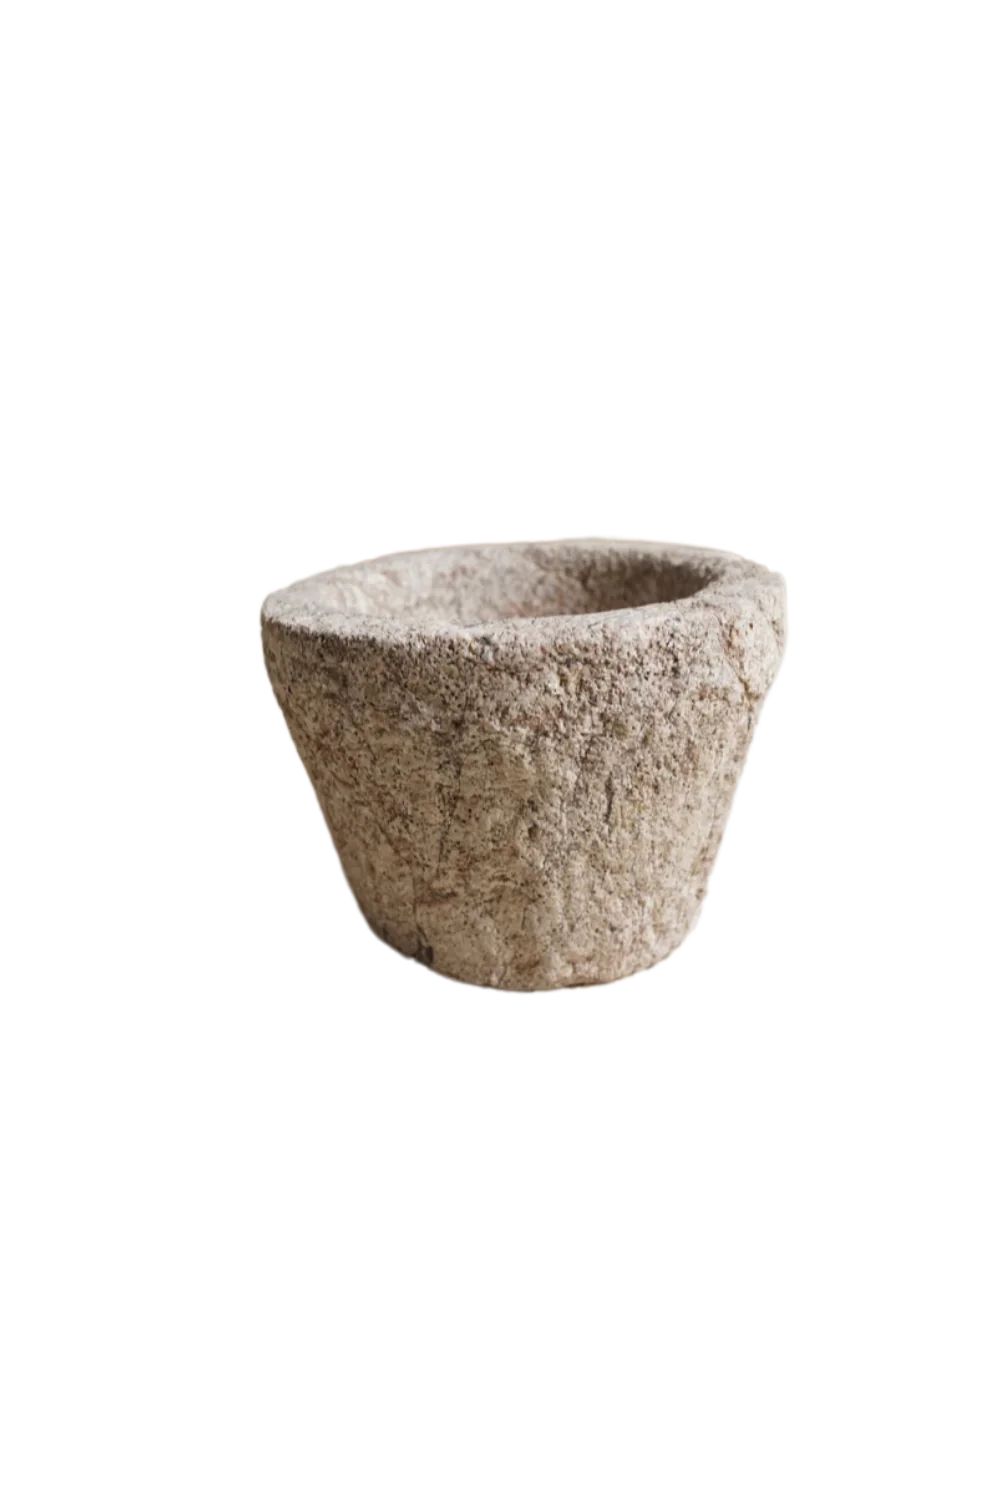 Stone Mortar Vintage Bowl | Luxe B Co